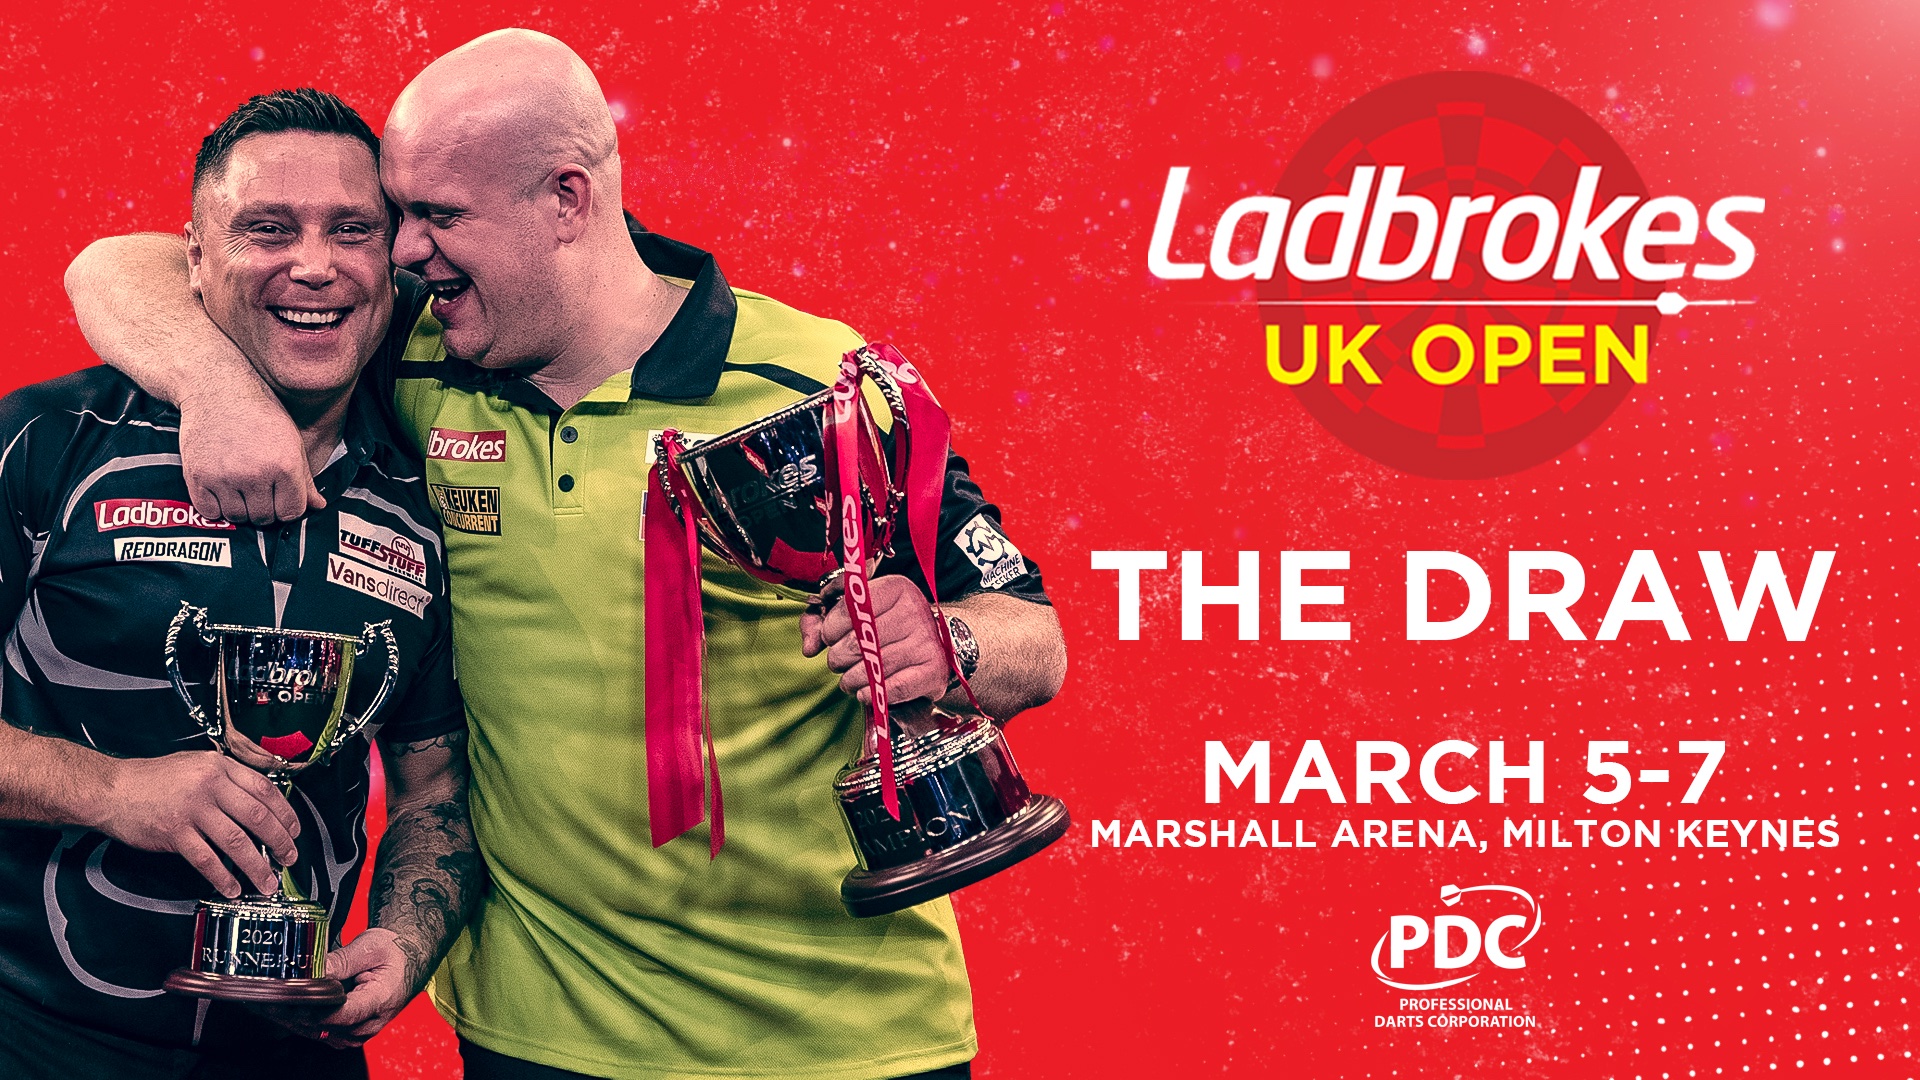 PDC Darts on Twitter: "𝗧𝗵𝗲 𝗗𝗿𝗮𝘄 Here's the draw for 2021 @ Ladbrokes UK Open, starting this Friday! ➡️ https://t.co/WIMcxf08M8 https://t.co/5BOERQ9Zd5" / Twitter